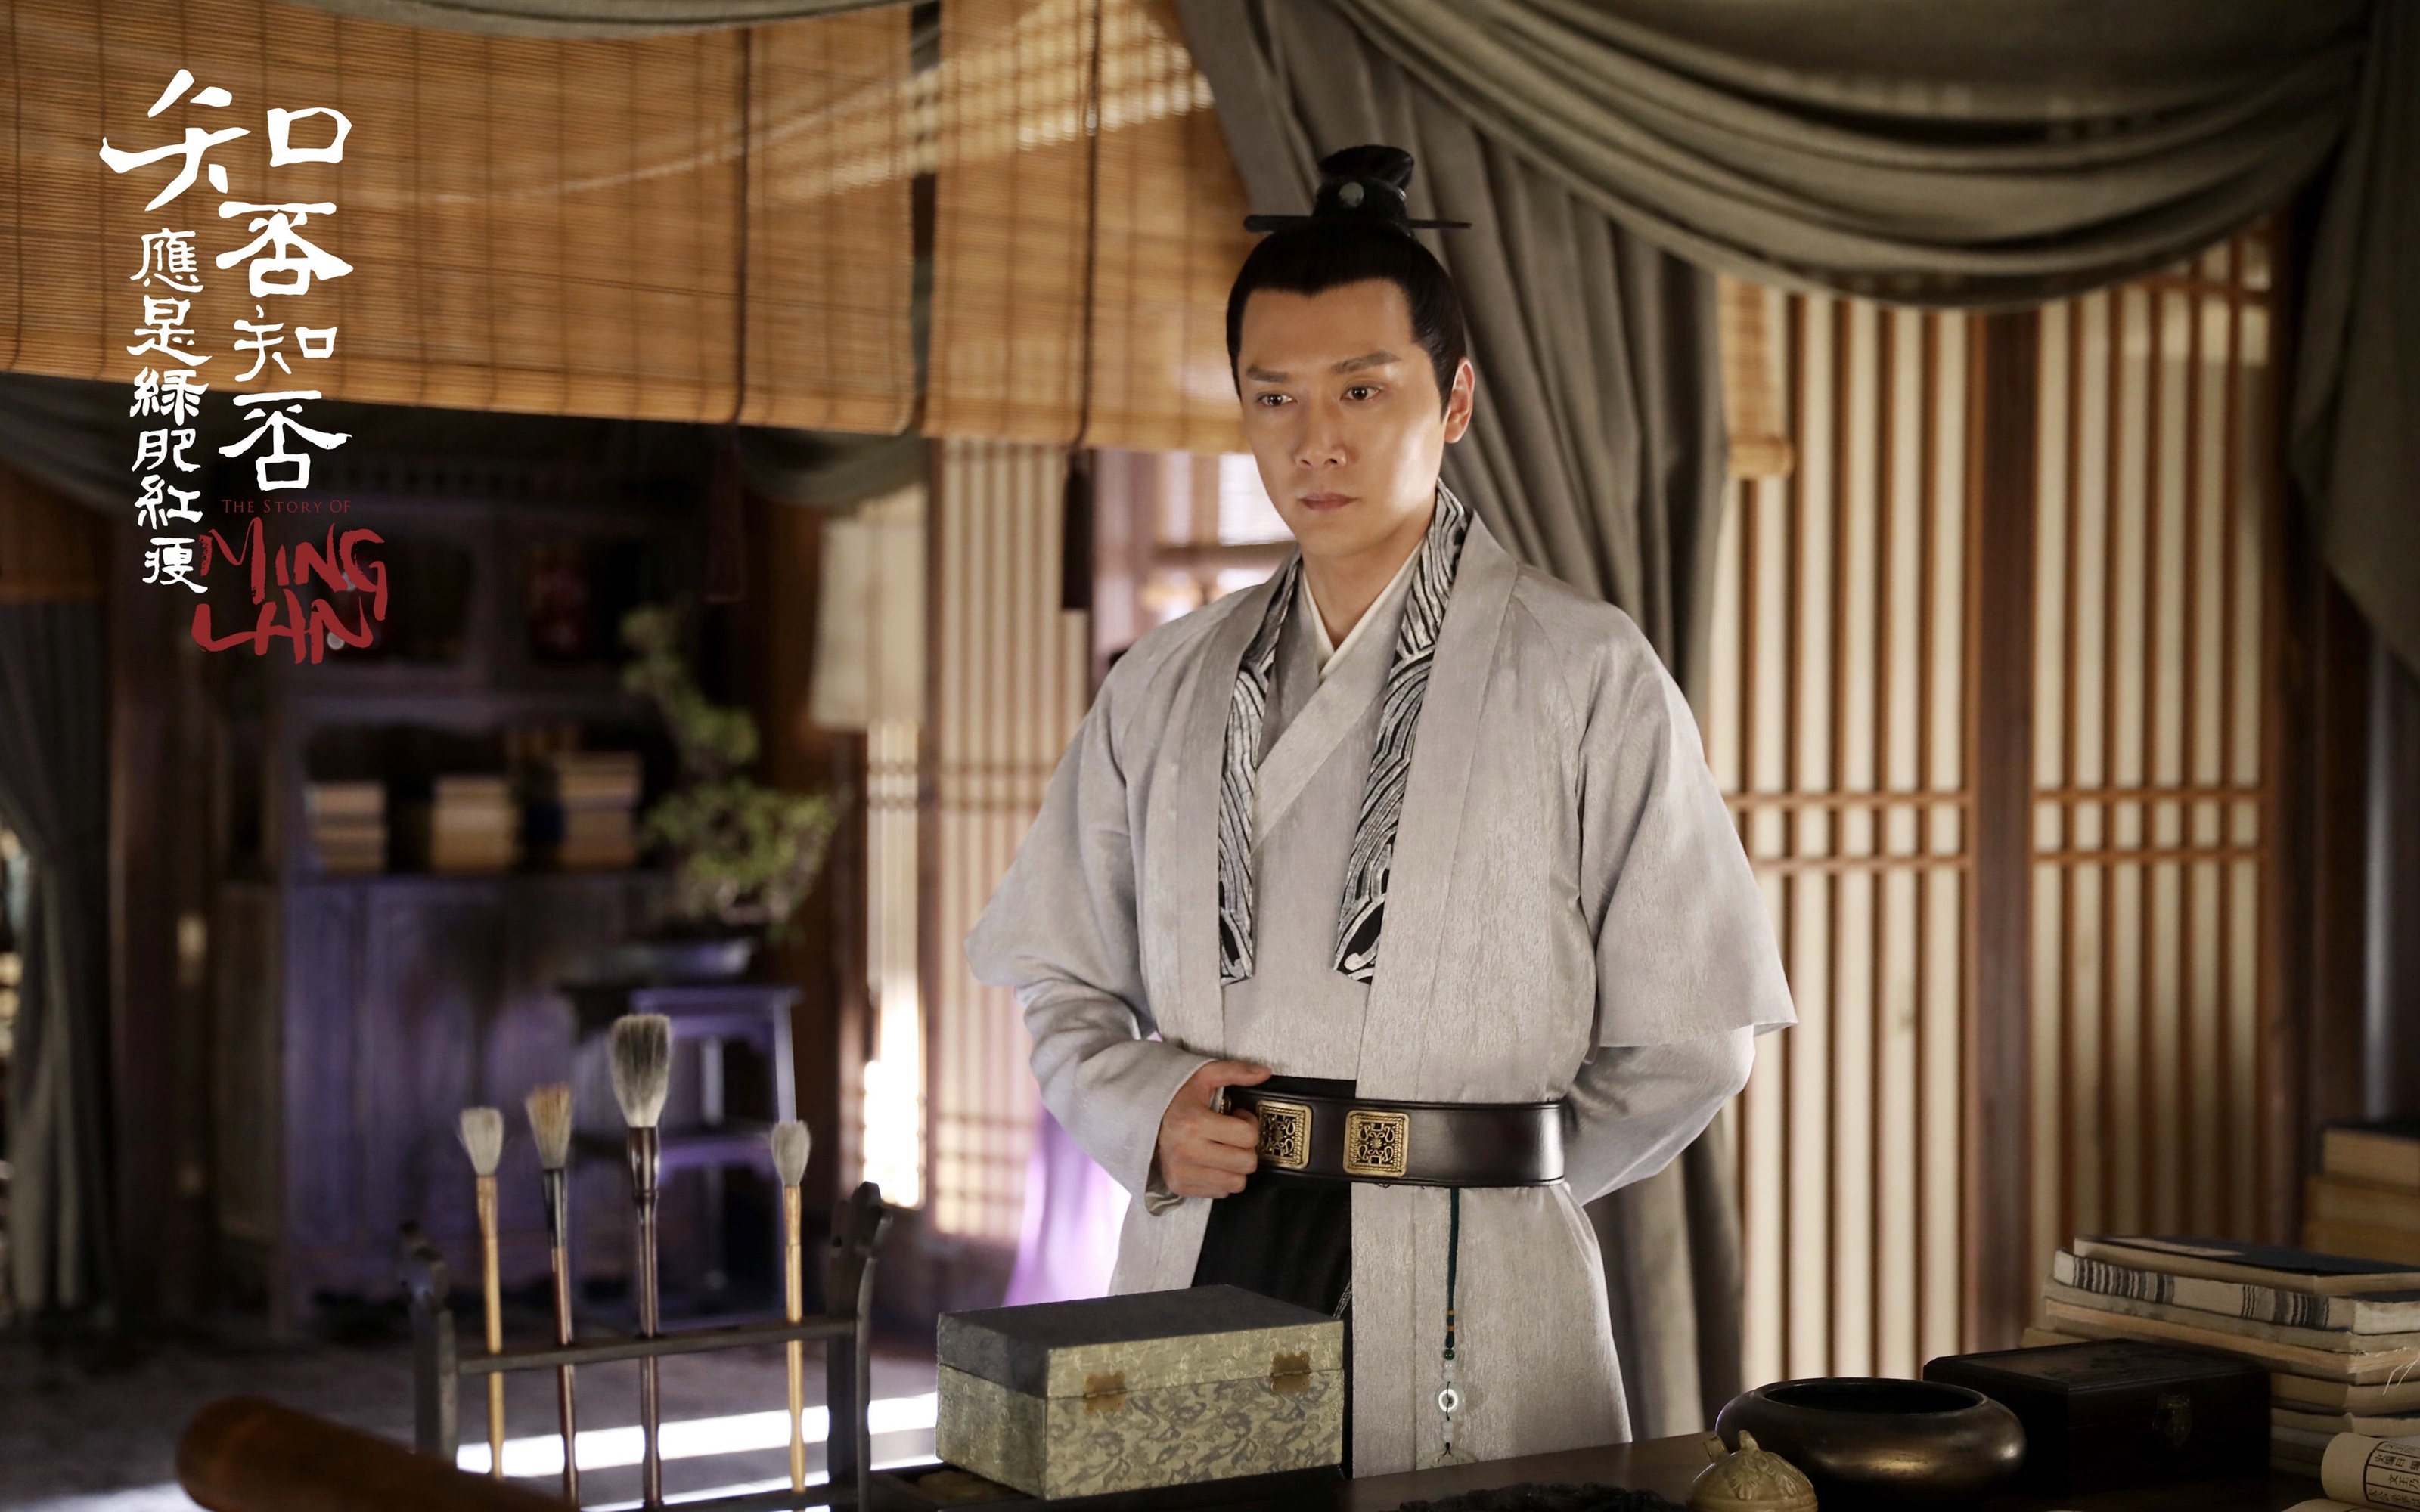 The Story Of MingLan, TV series HD wallpapers #49 - 3200x2000